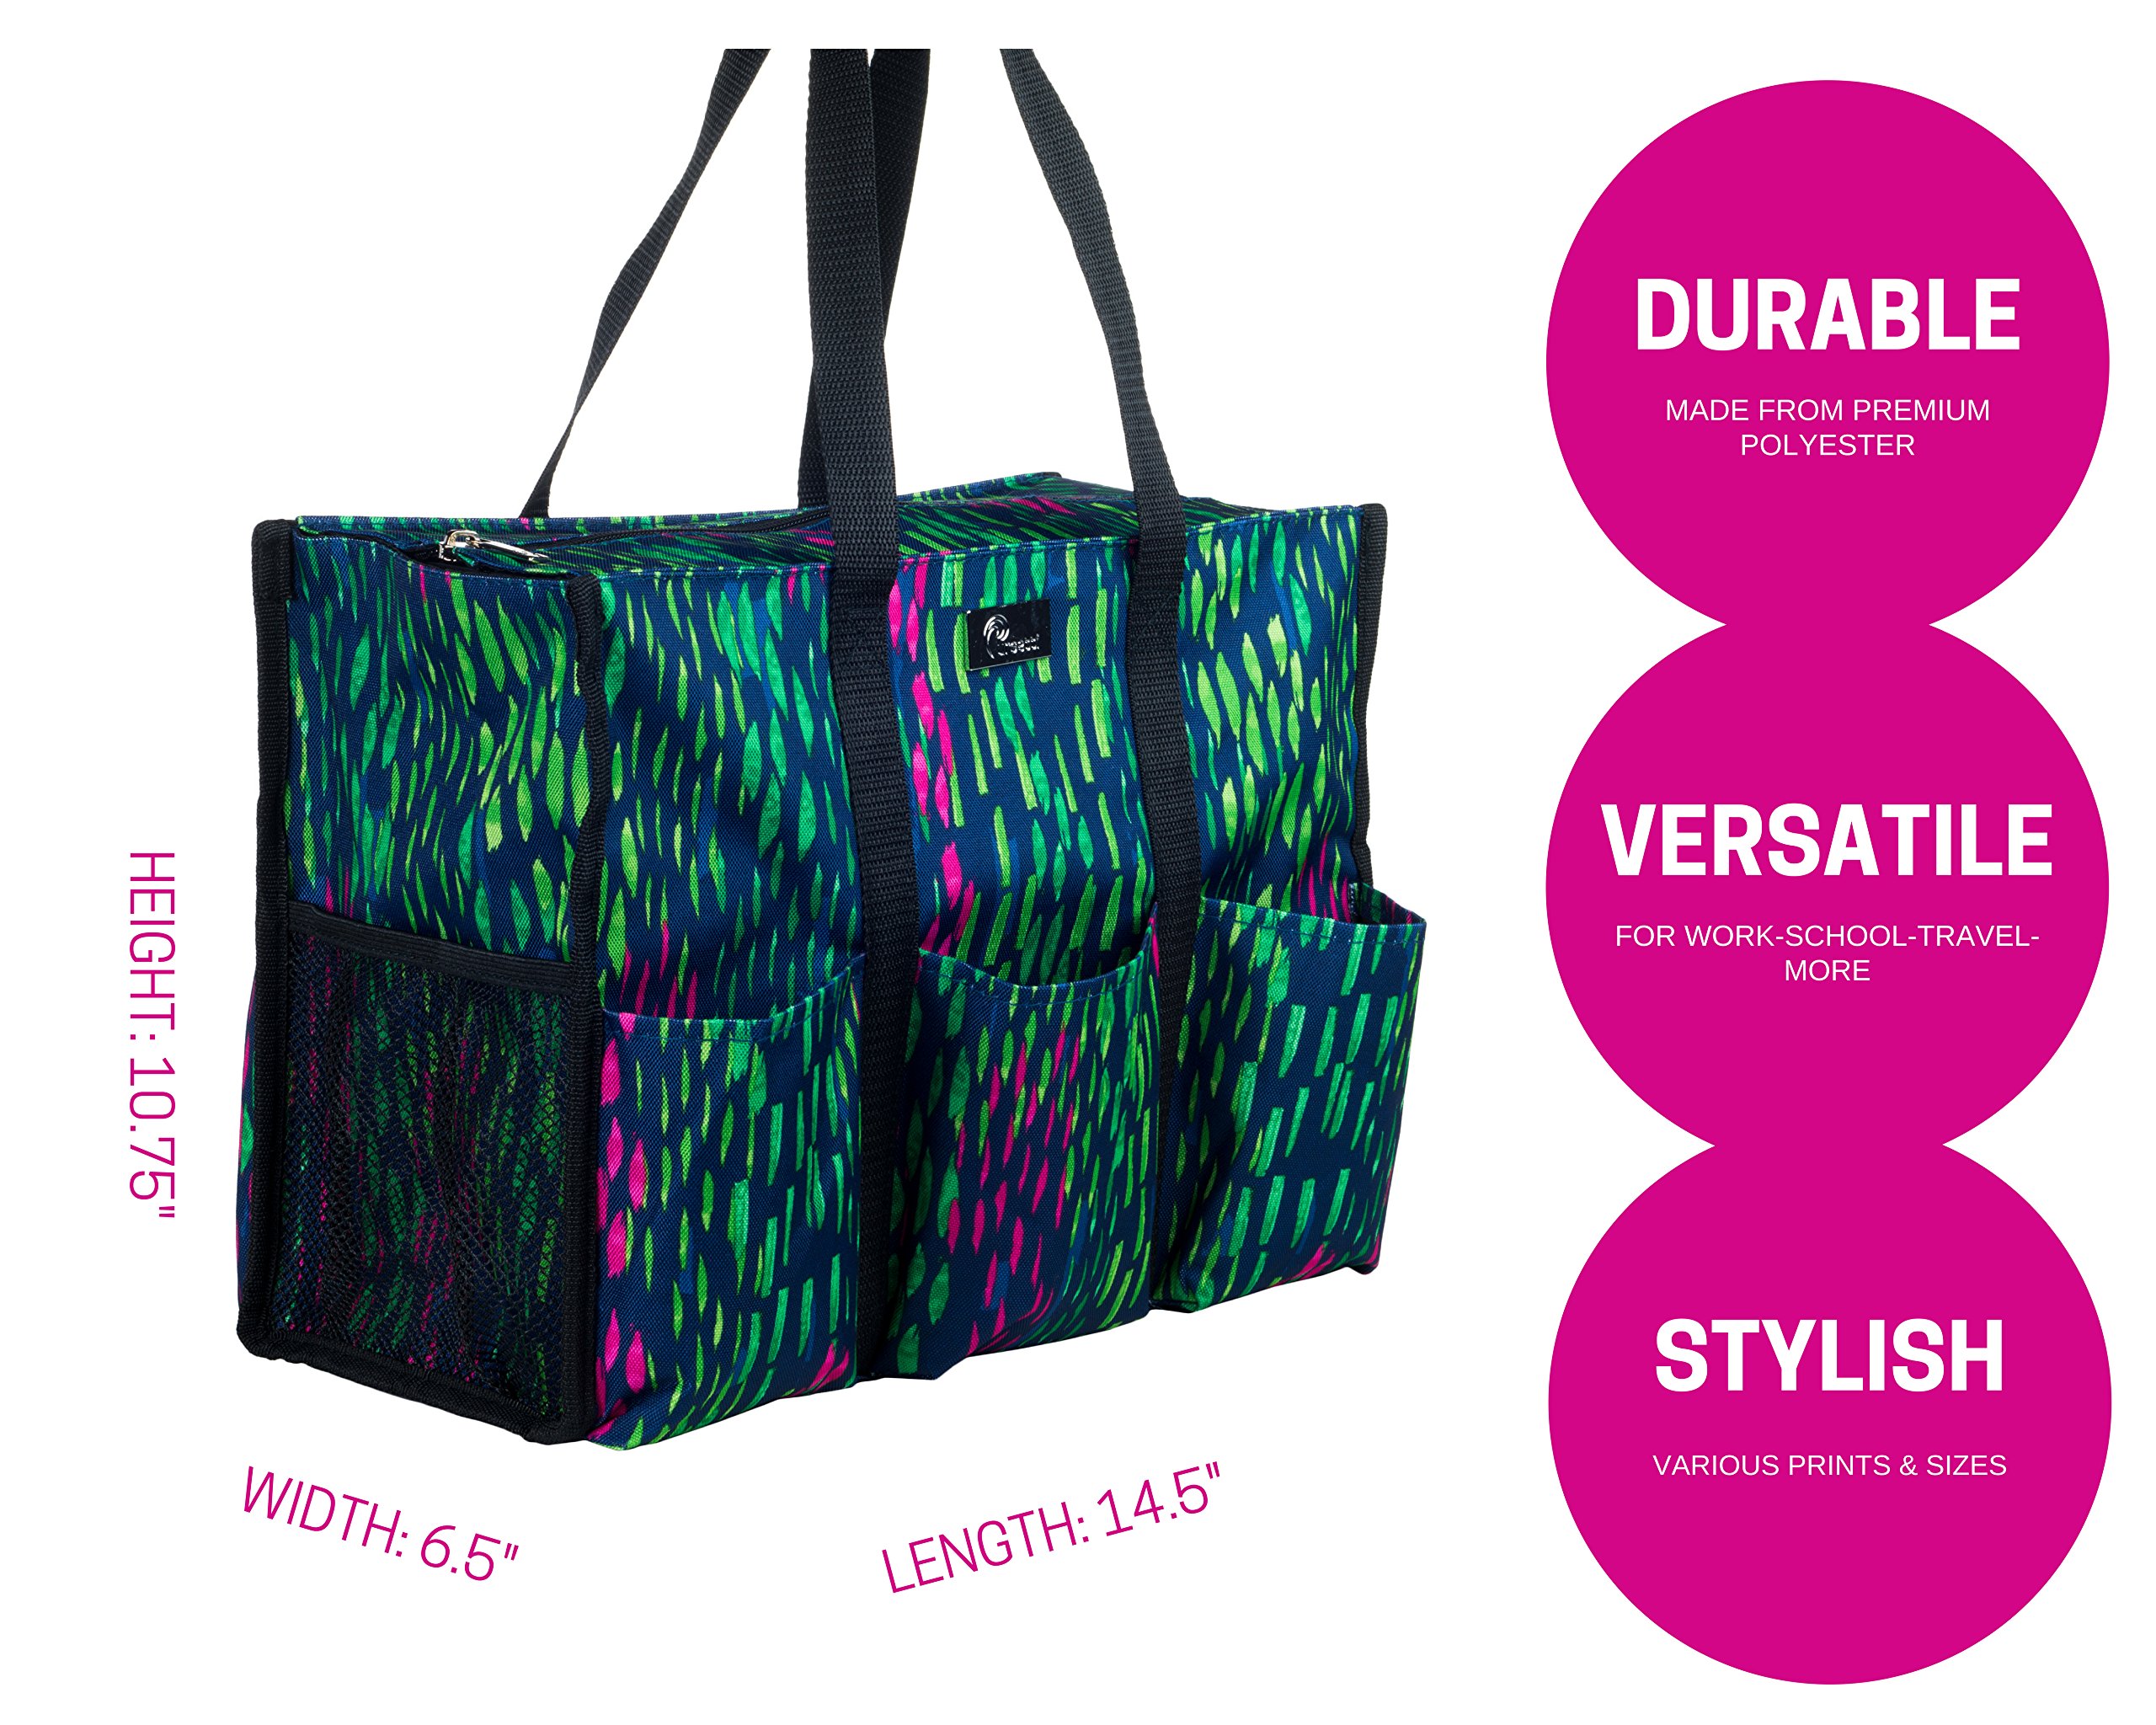 Pursetti Utility Tote with Pockets & Compartments-Perfect Nurse Tote Bag, Teacher Bag, Work Bags for Women & Craft Tote (Tropical Rain)